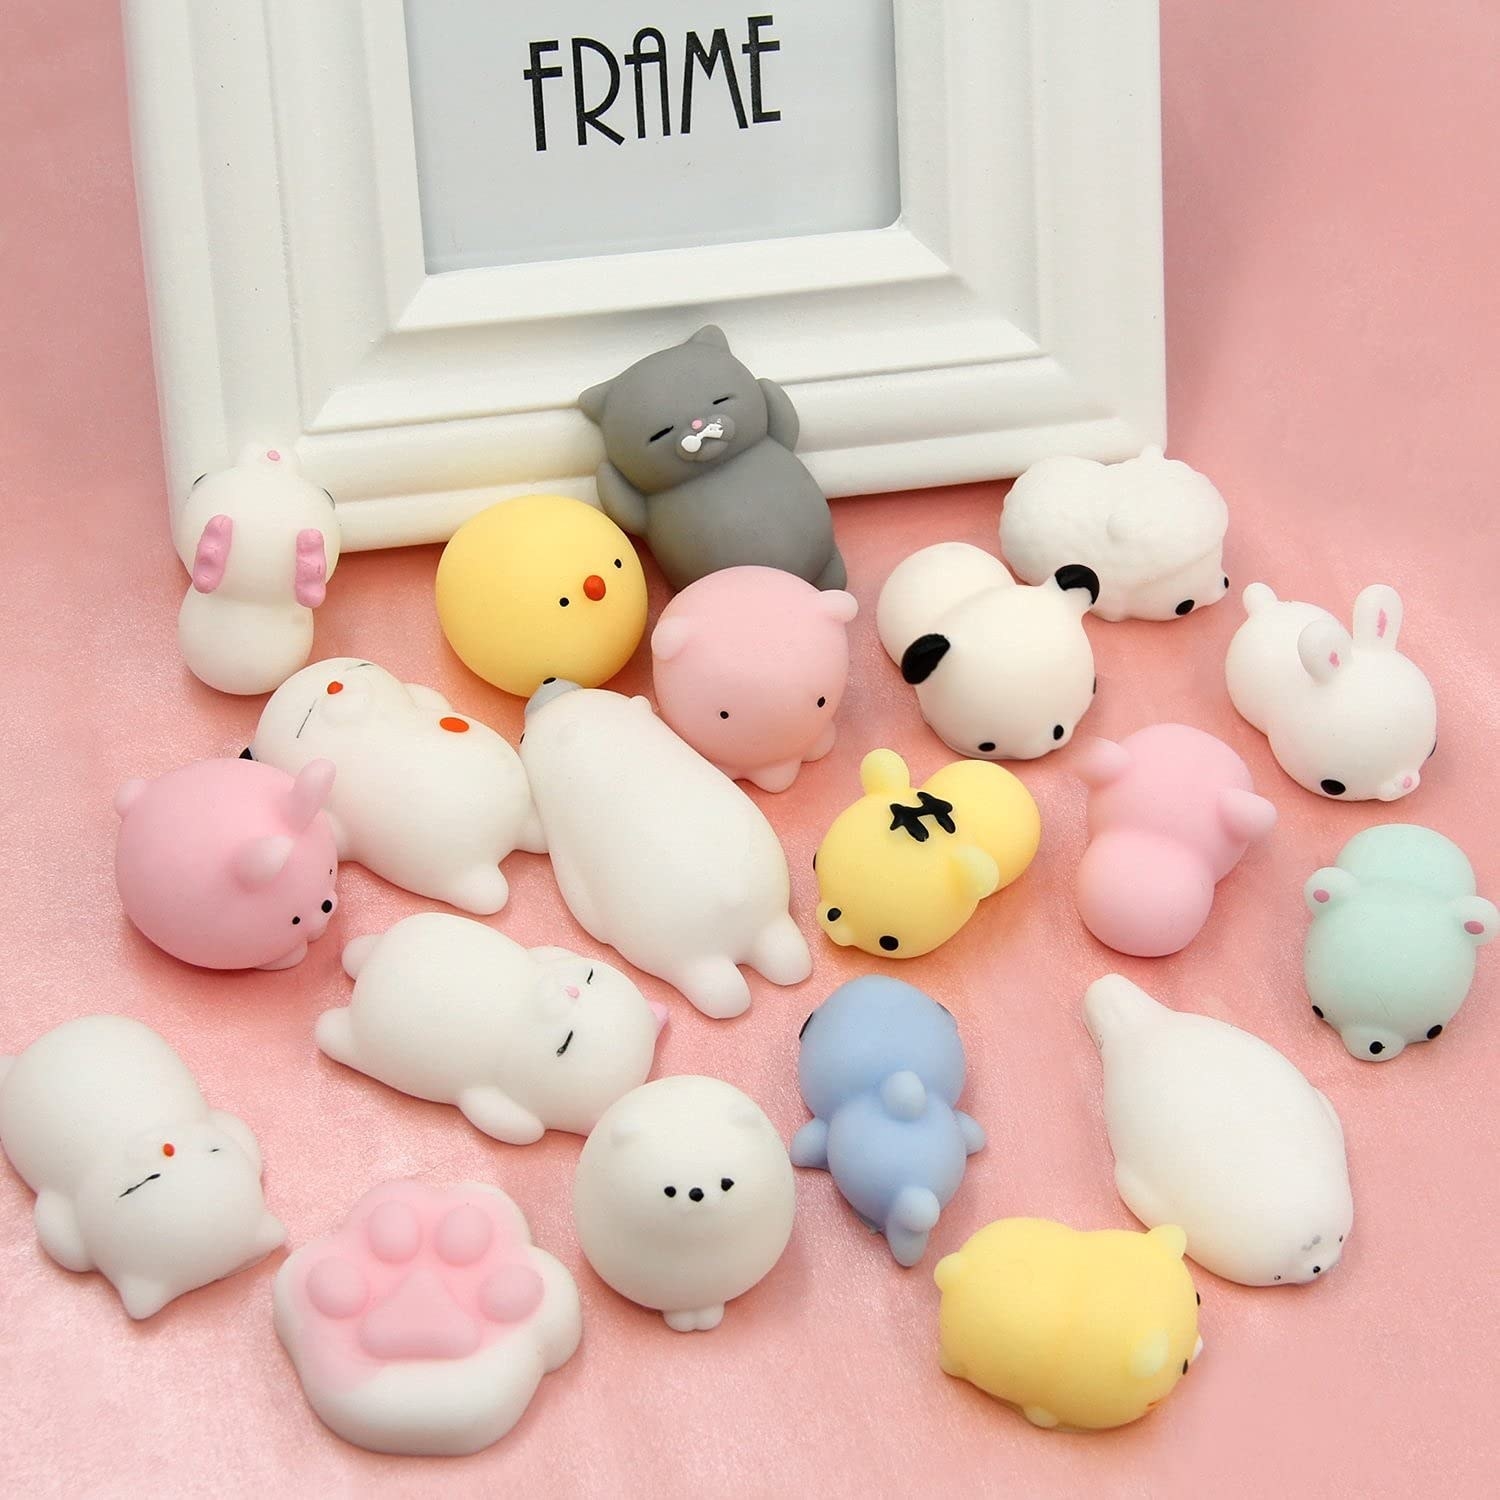 A bunch of tiny silicone animals next to a picture frame